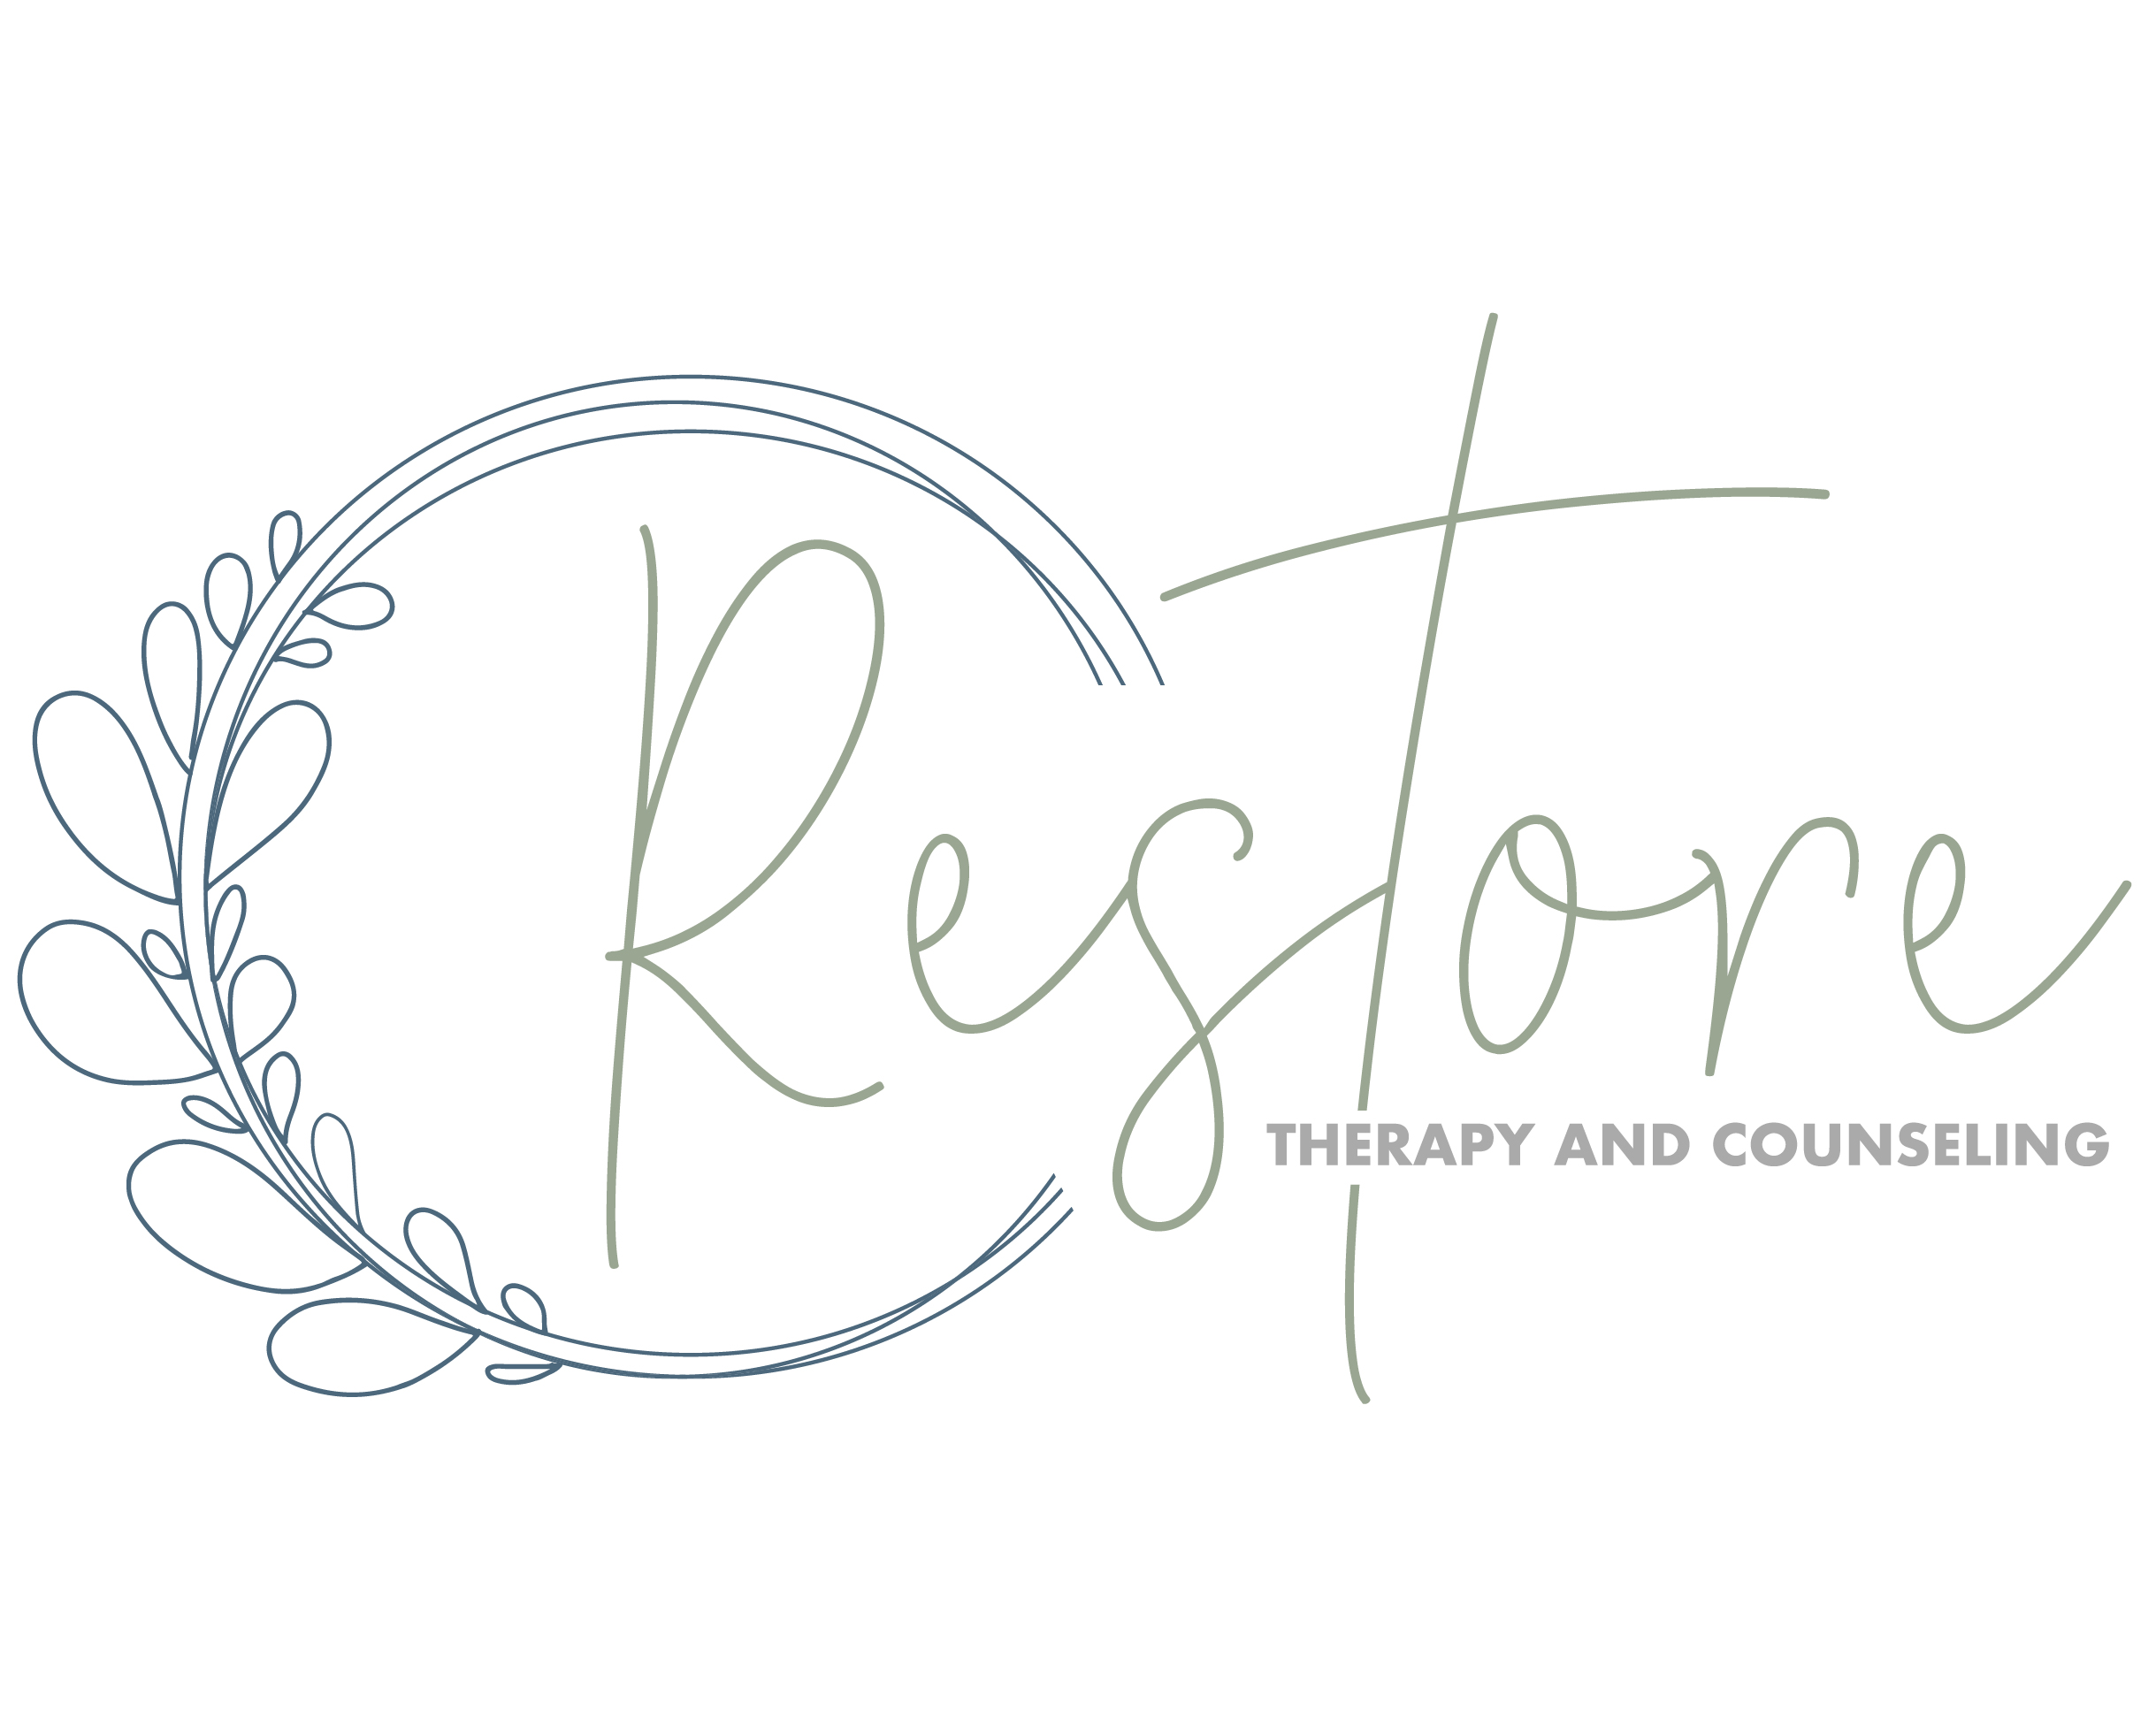 Restore Therapy & Counseling